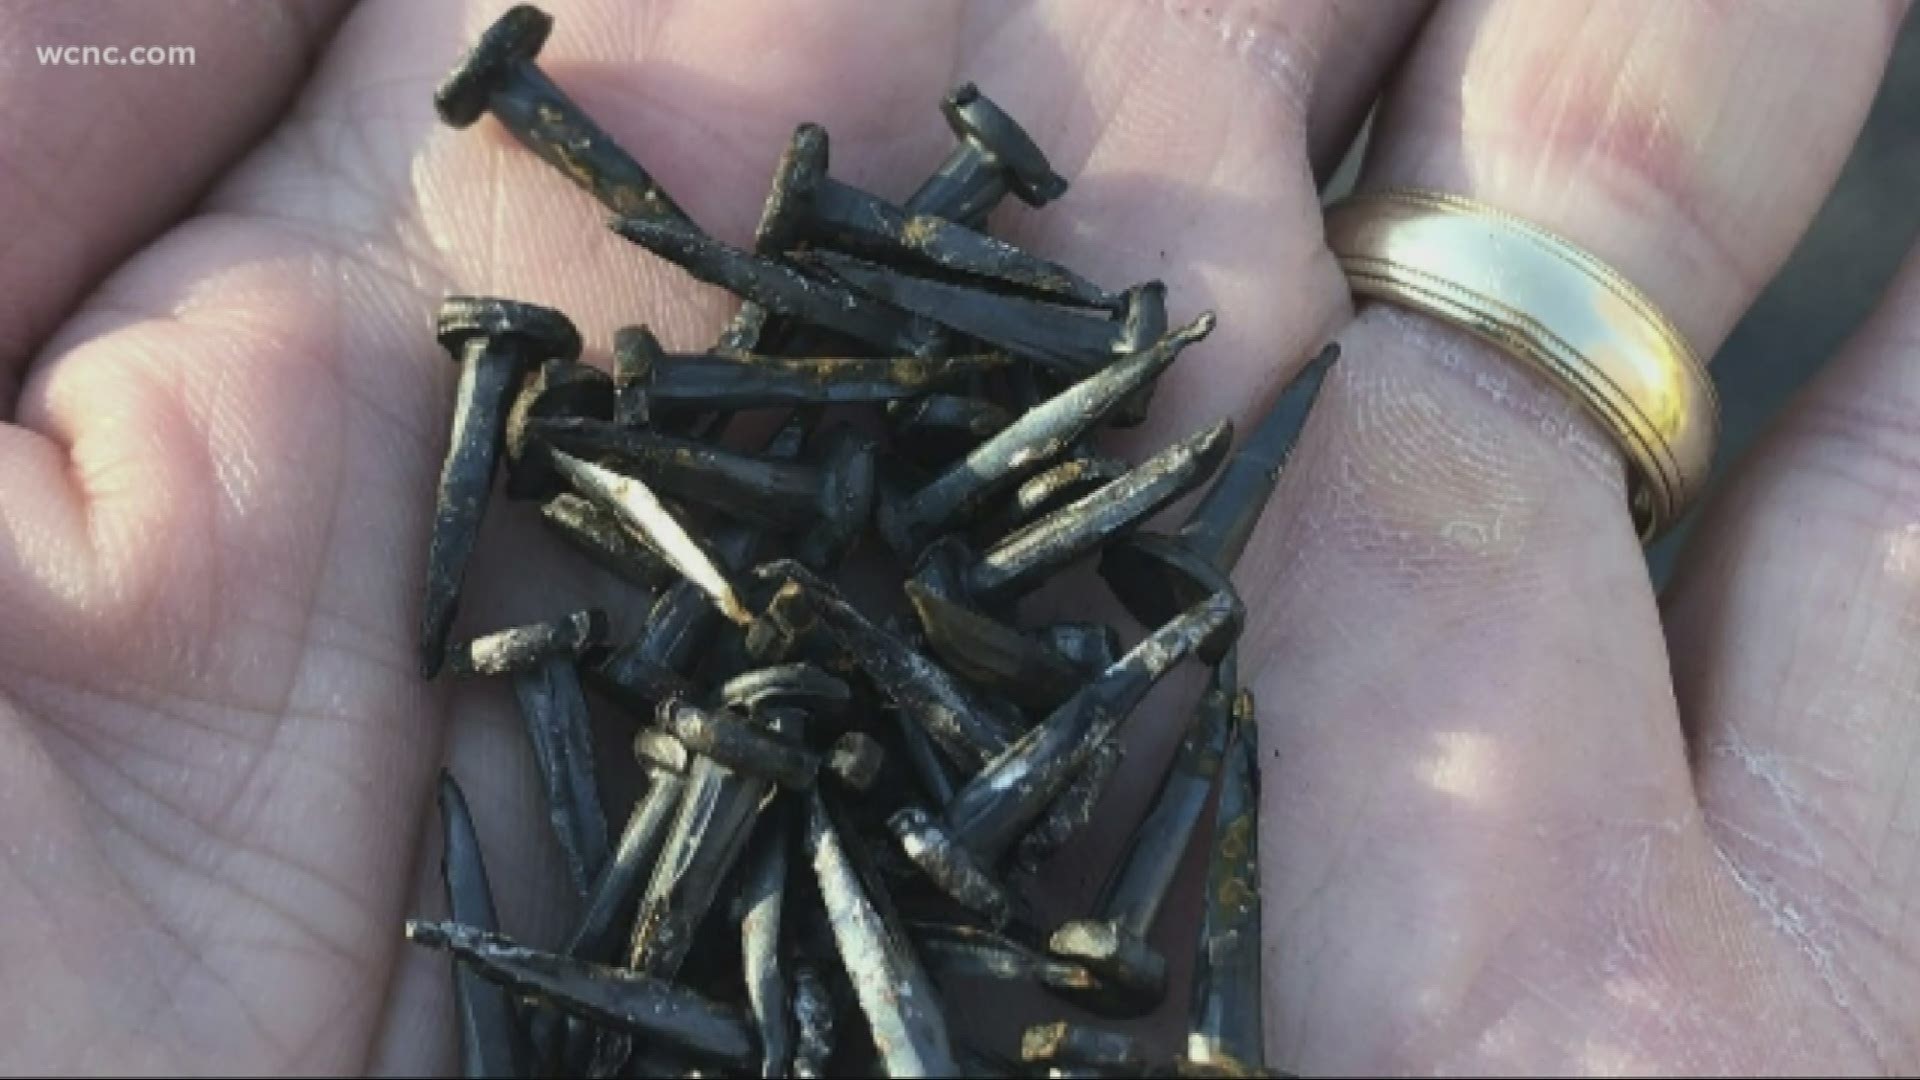 Police say someone left nails in the parking lot, damaging to several vehicles. The biggest concern is the potential impact on police responding to emergencies.